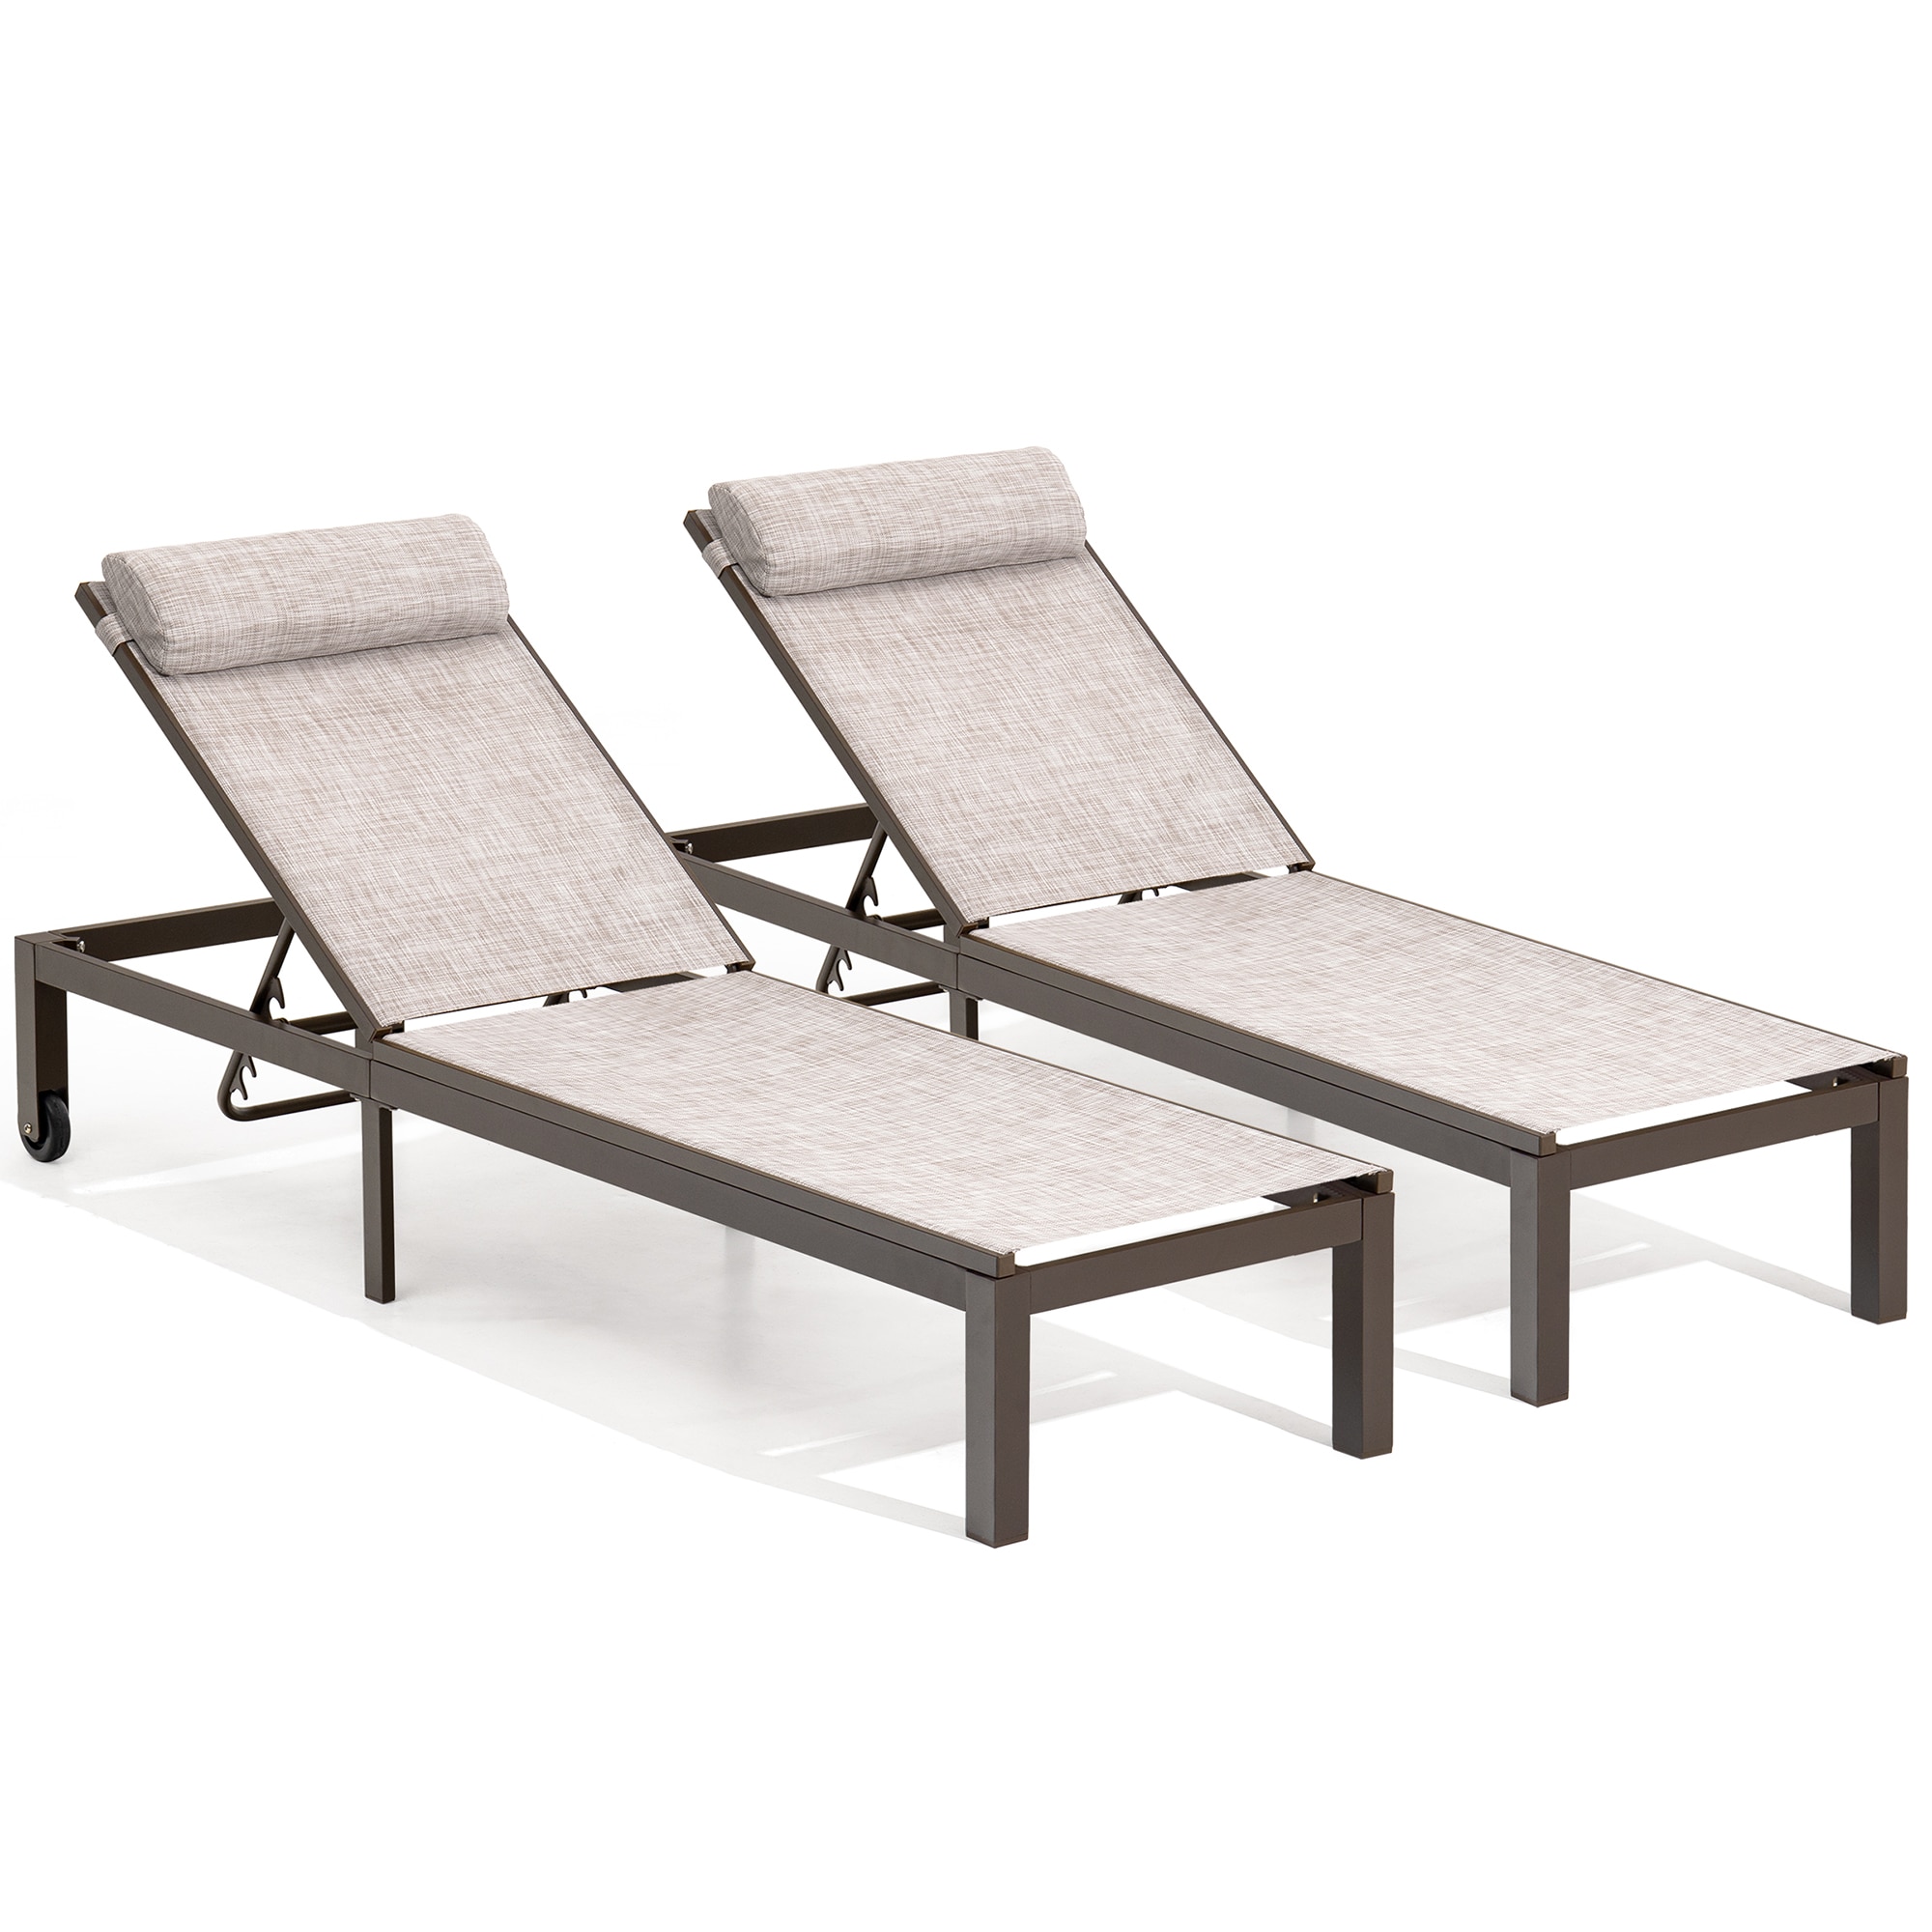 Crestlive Products Patio Chaise Lounge Set Of 2 Aluminum Frame In Brown  Finish Metal Frame Stationary Chaise Lounge Chair(S) With Off-White  Textilene Fabric Sling Seat In The Patio Chairs Department At Lowes.Com